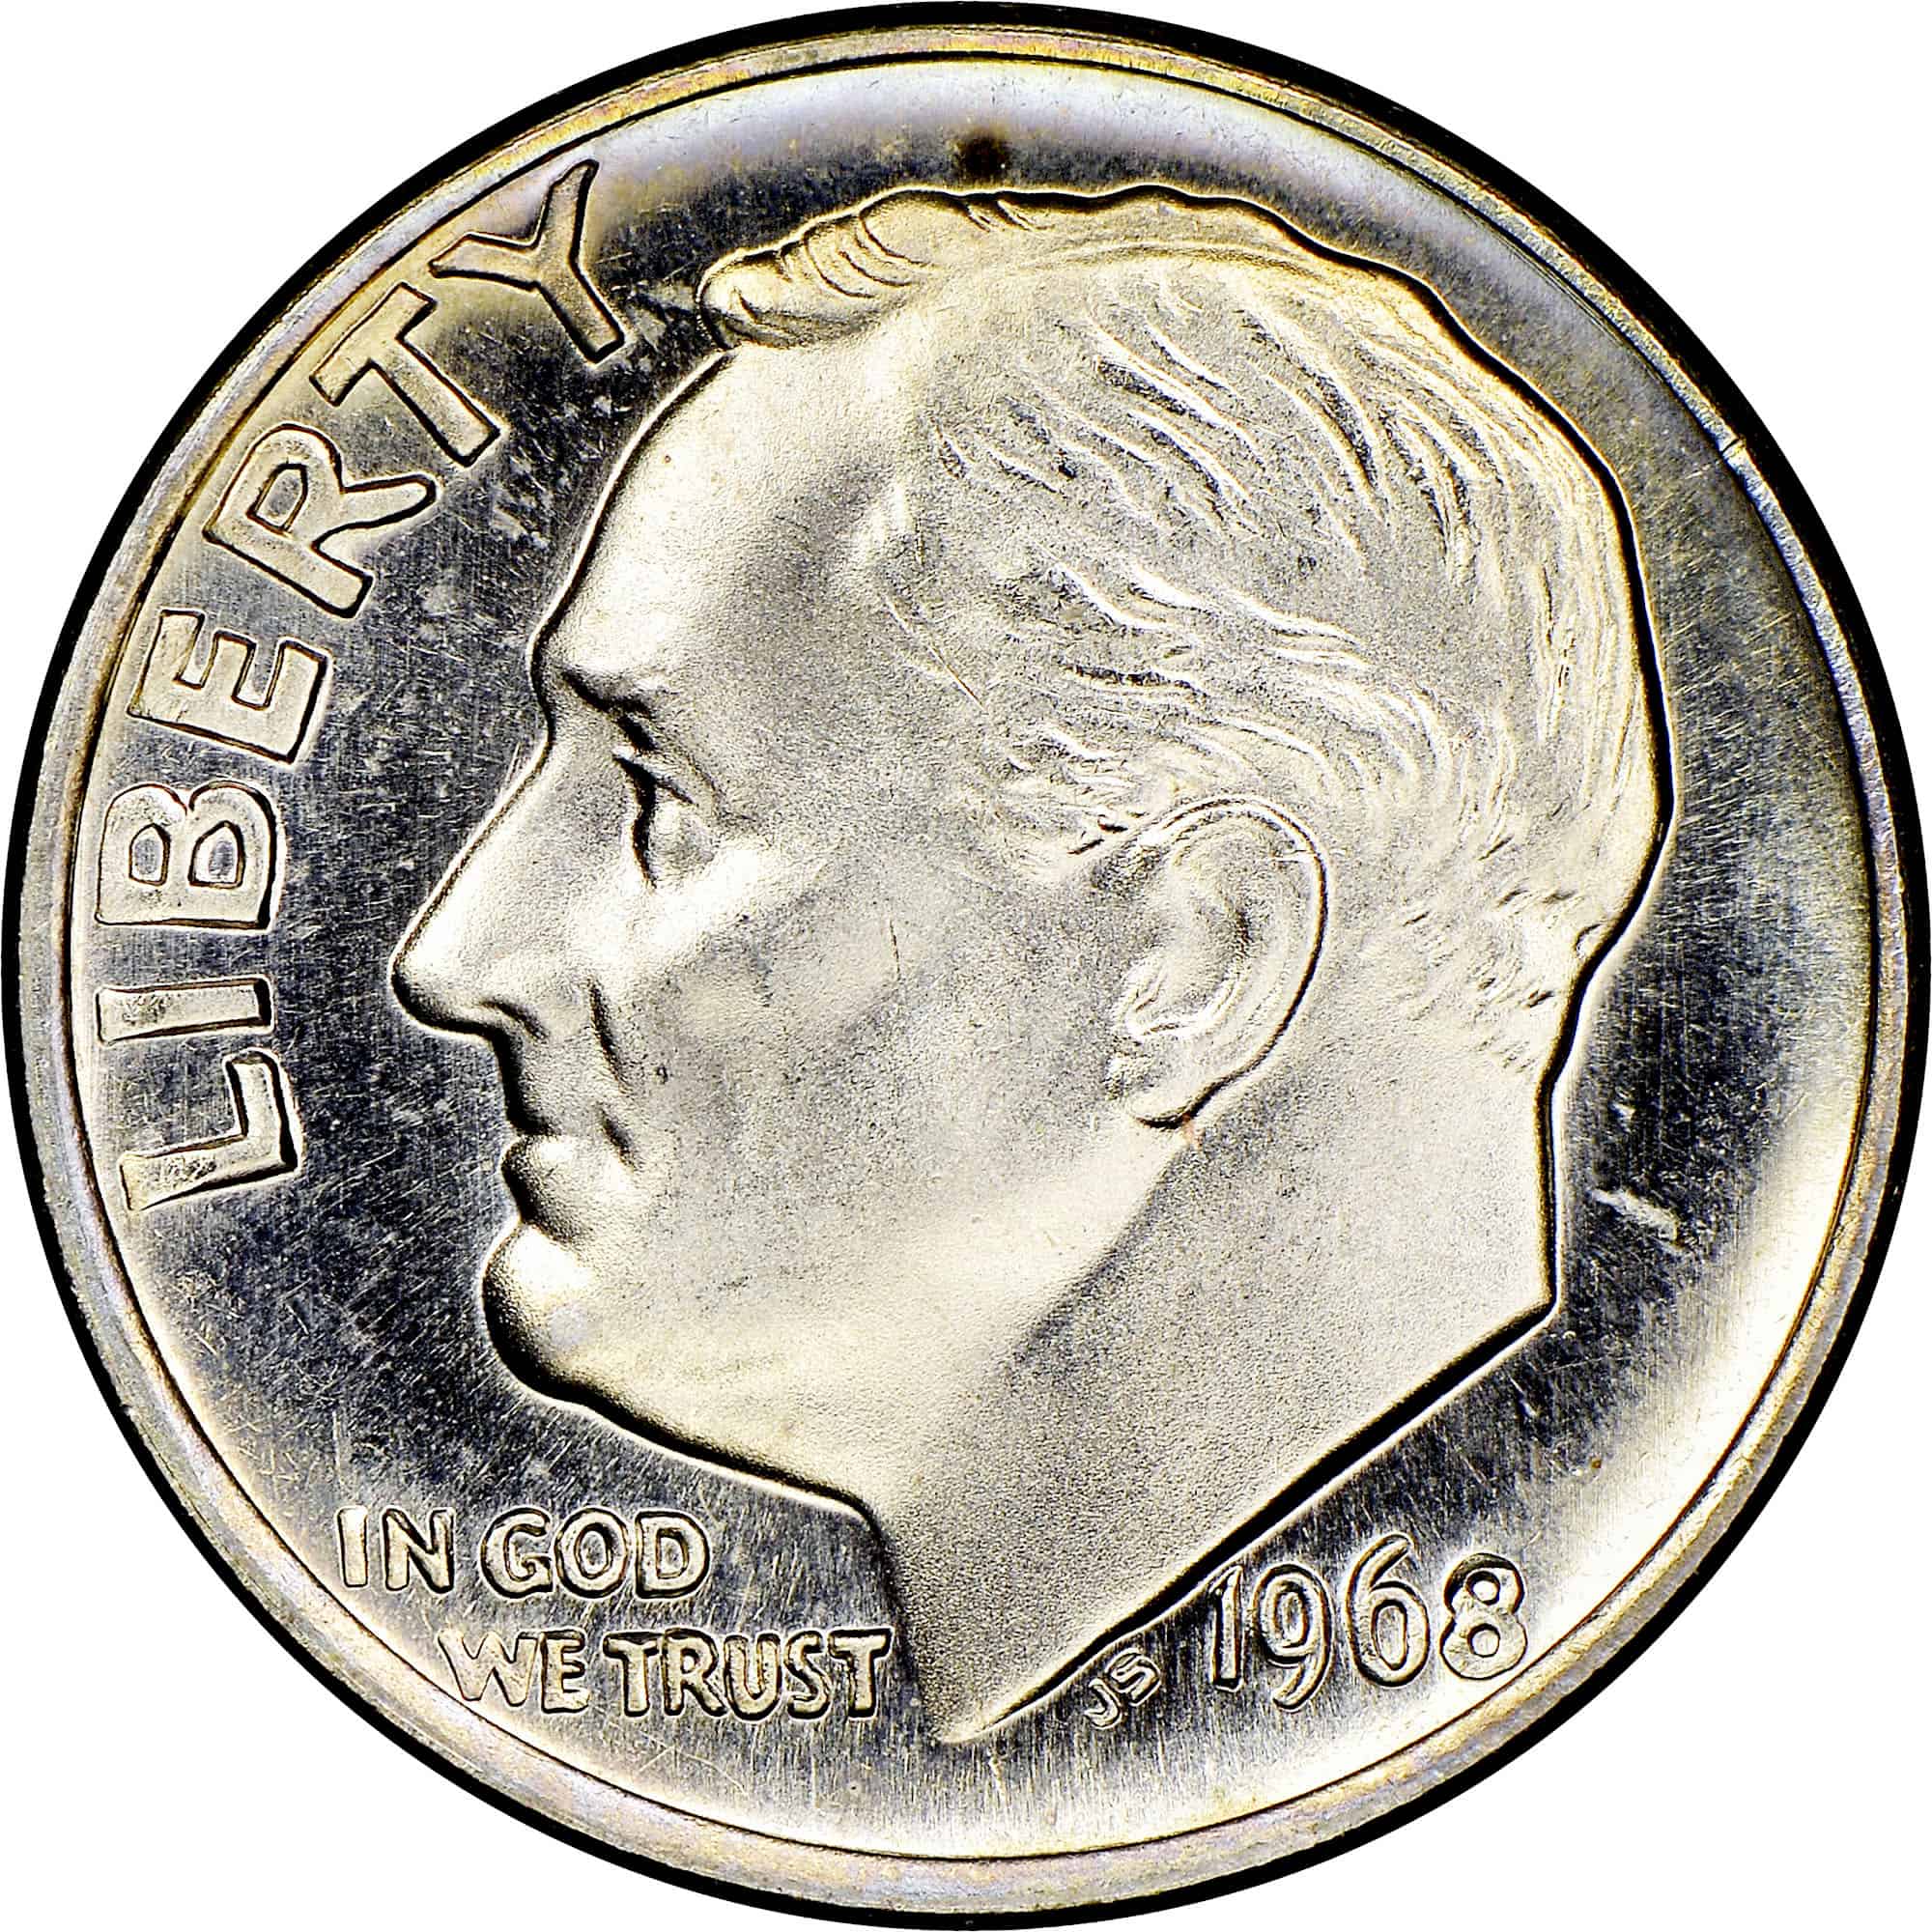 The Obverse of the 1968 Dime